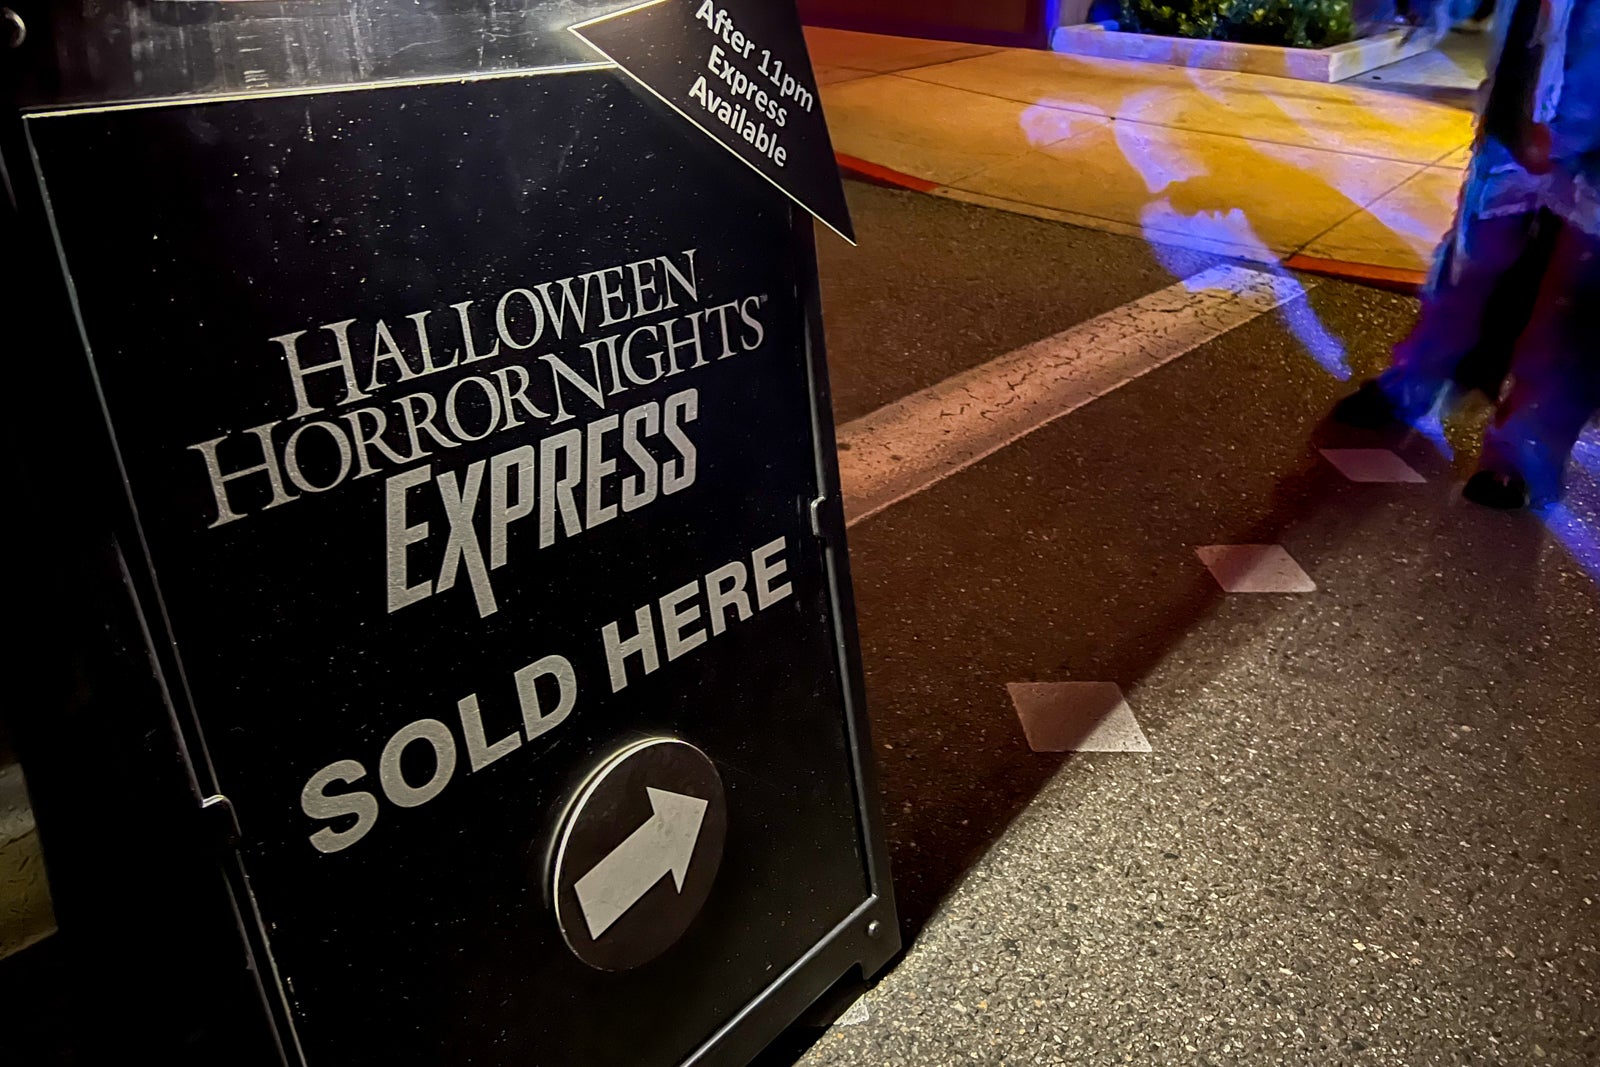 Halloween Horror Nights Express lets you skip the line at the haunted houses